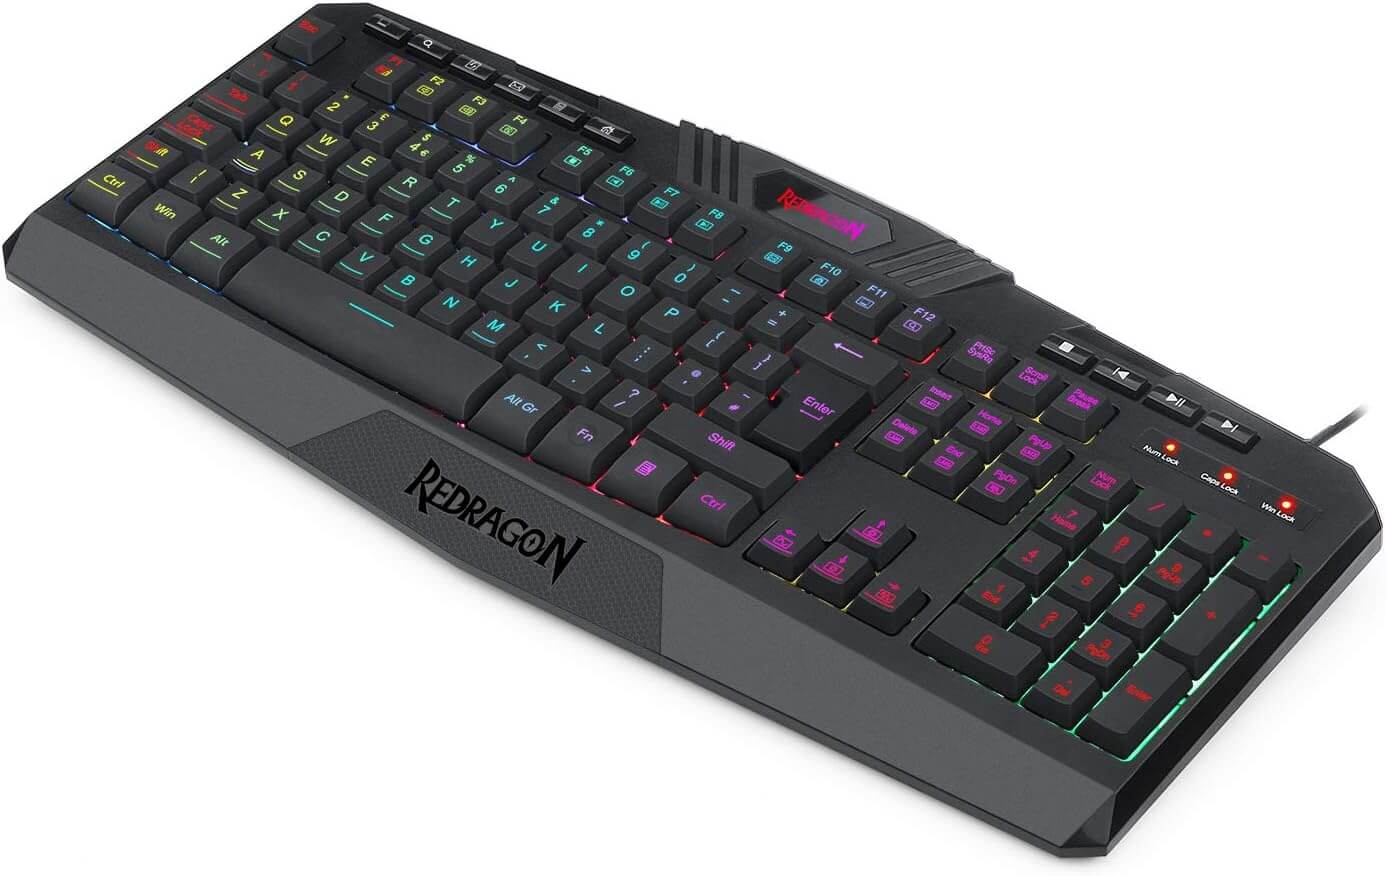 Redragon K503-A Harpe Pro Gaming Keyboard, RGB LED Backlit Wired, Multimedia Keys, Silent Membrane Keyboard with Wrist Rest for Windows PC Games